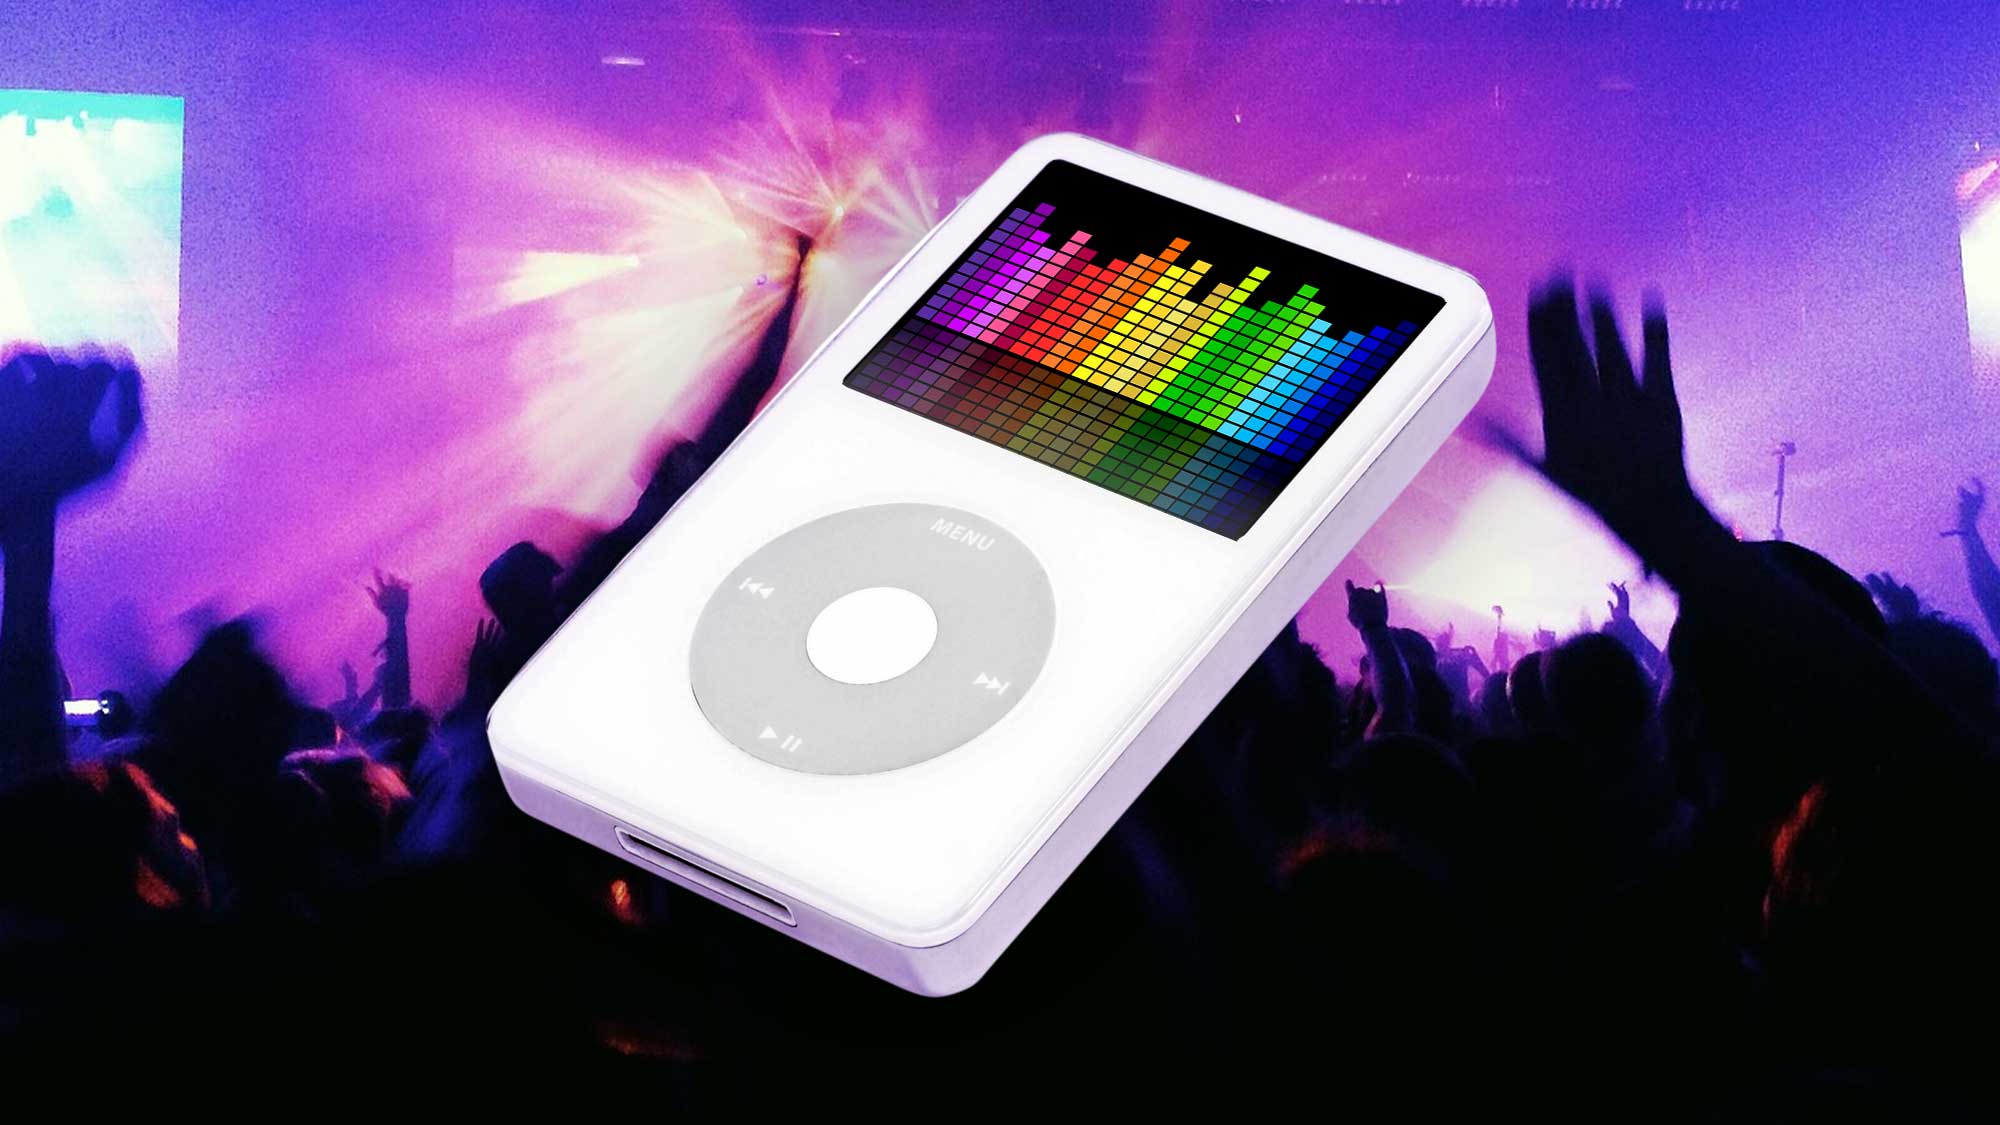 Fixed: What To Do When Your iPod Won't Sync